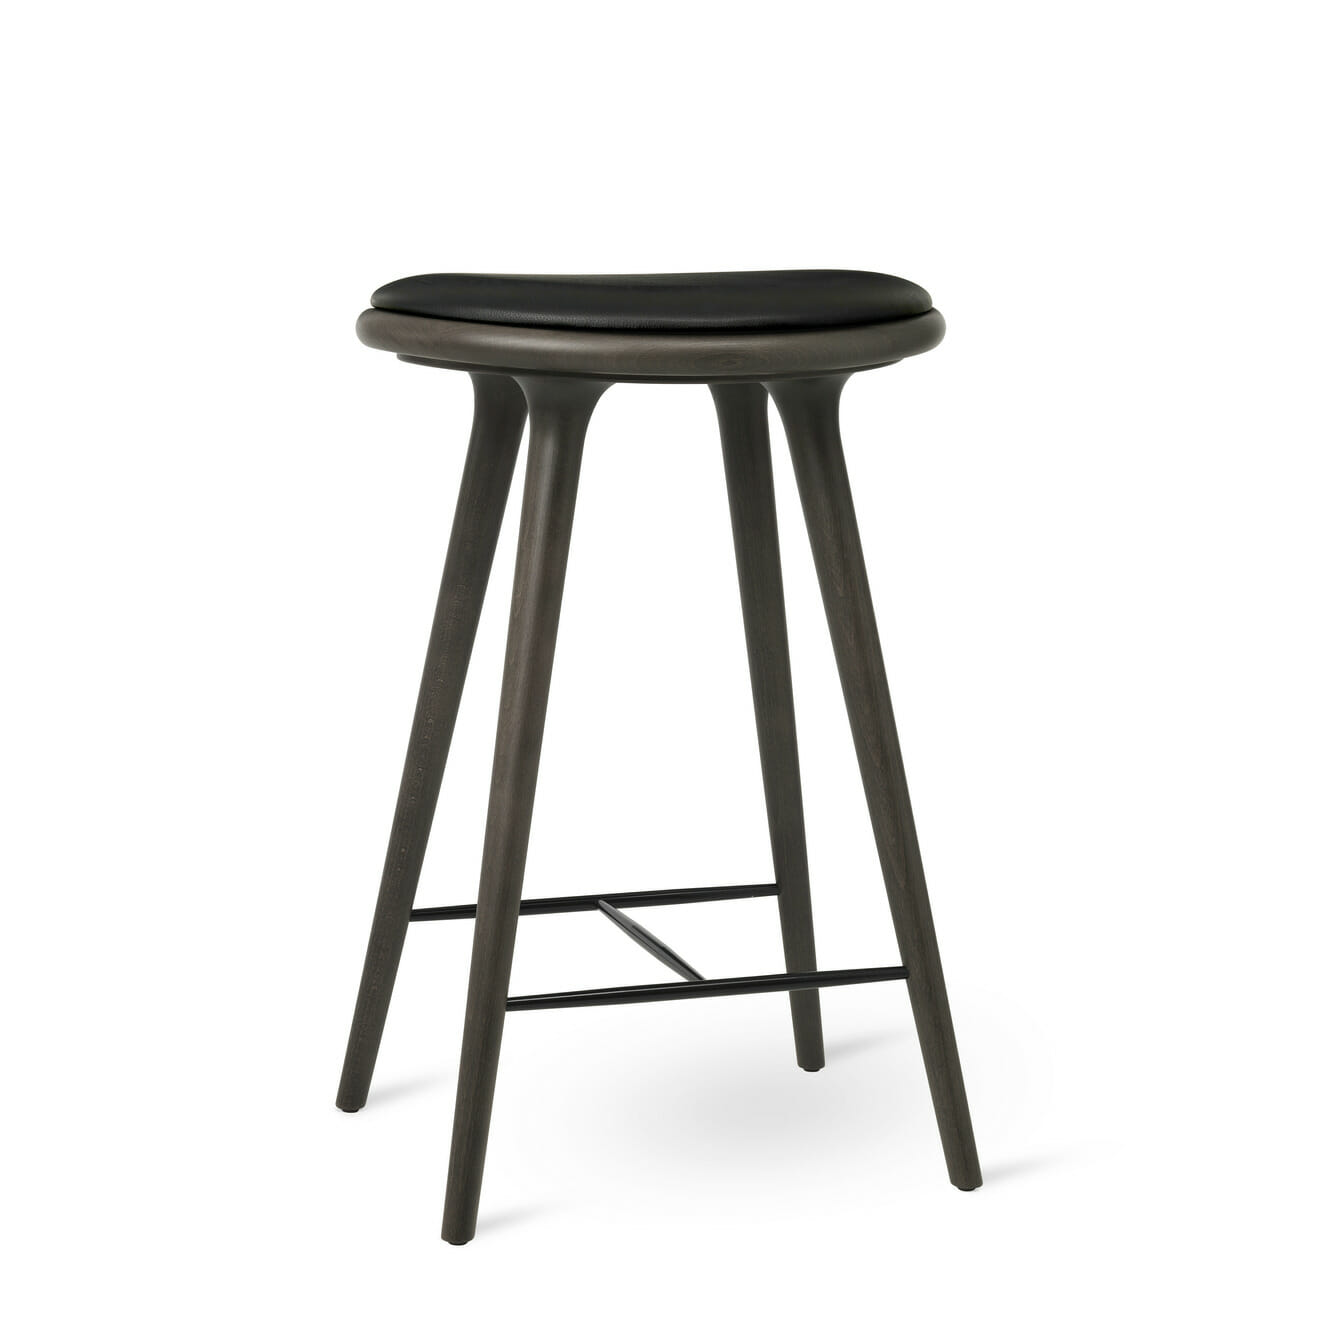 High Bar Stool by Olson and Baker - Designer & Contemporary Sofas, Furniture - Olson and Baker showcases original designs from authentic, designer brands. Buy contemporary furniture, lighting, storage, sofas & chairs at Olson + Baker.